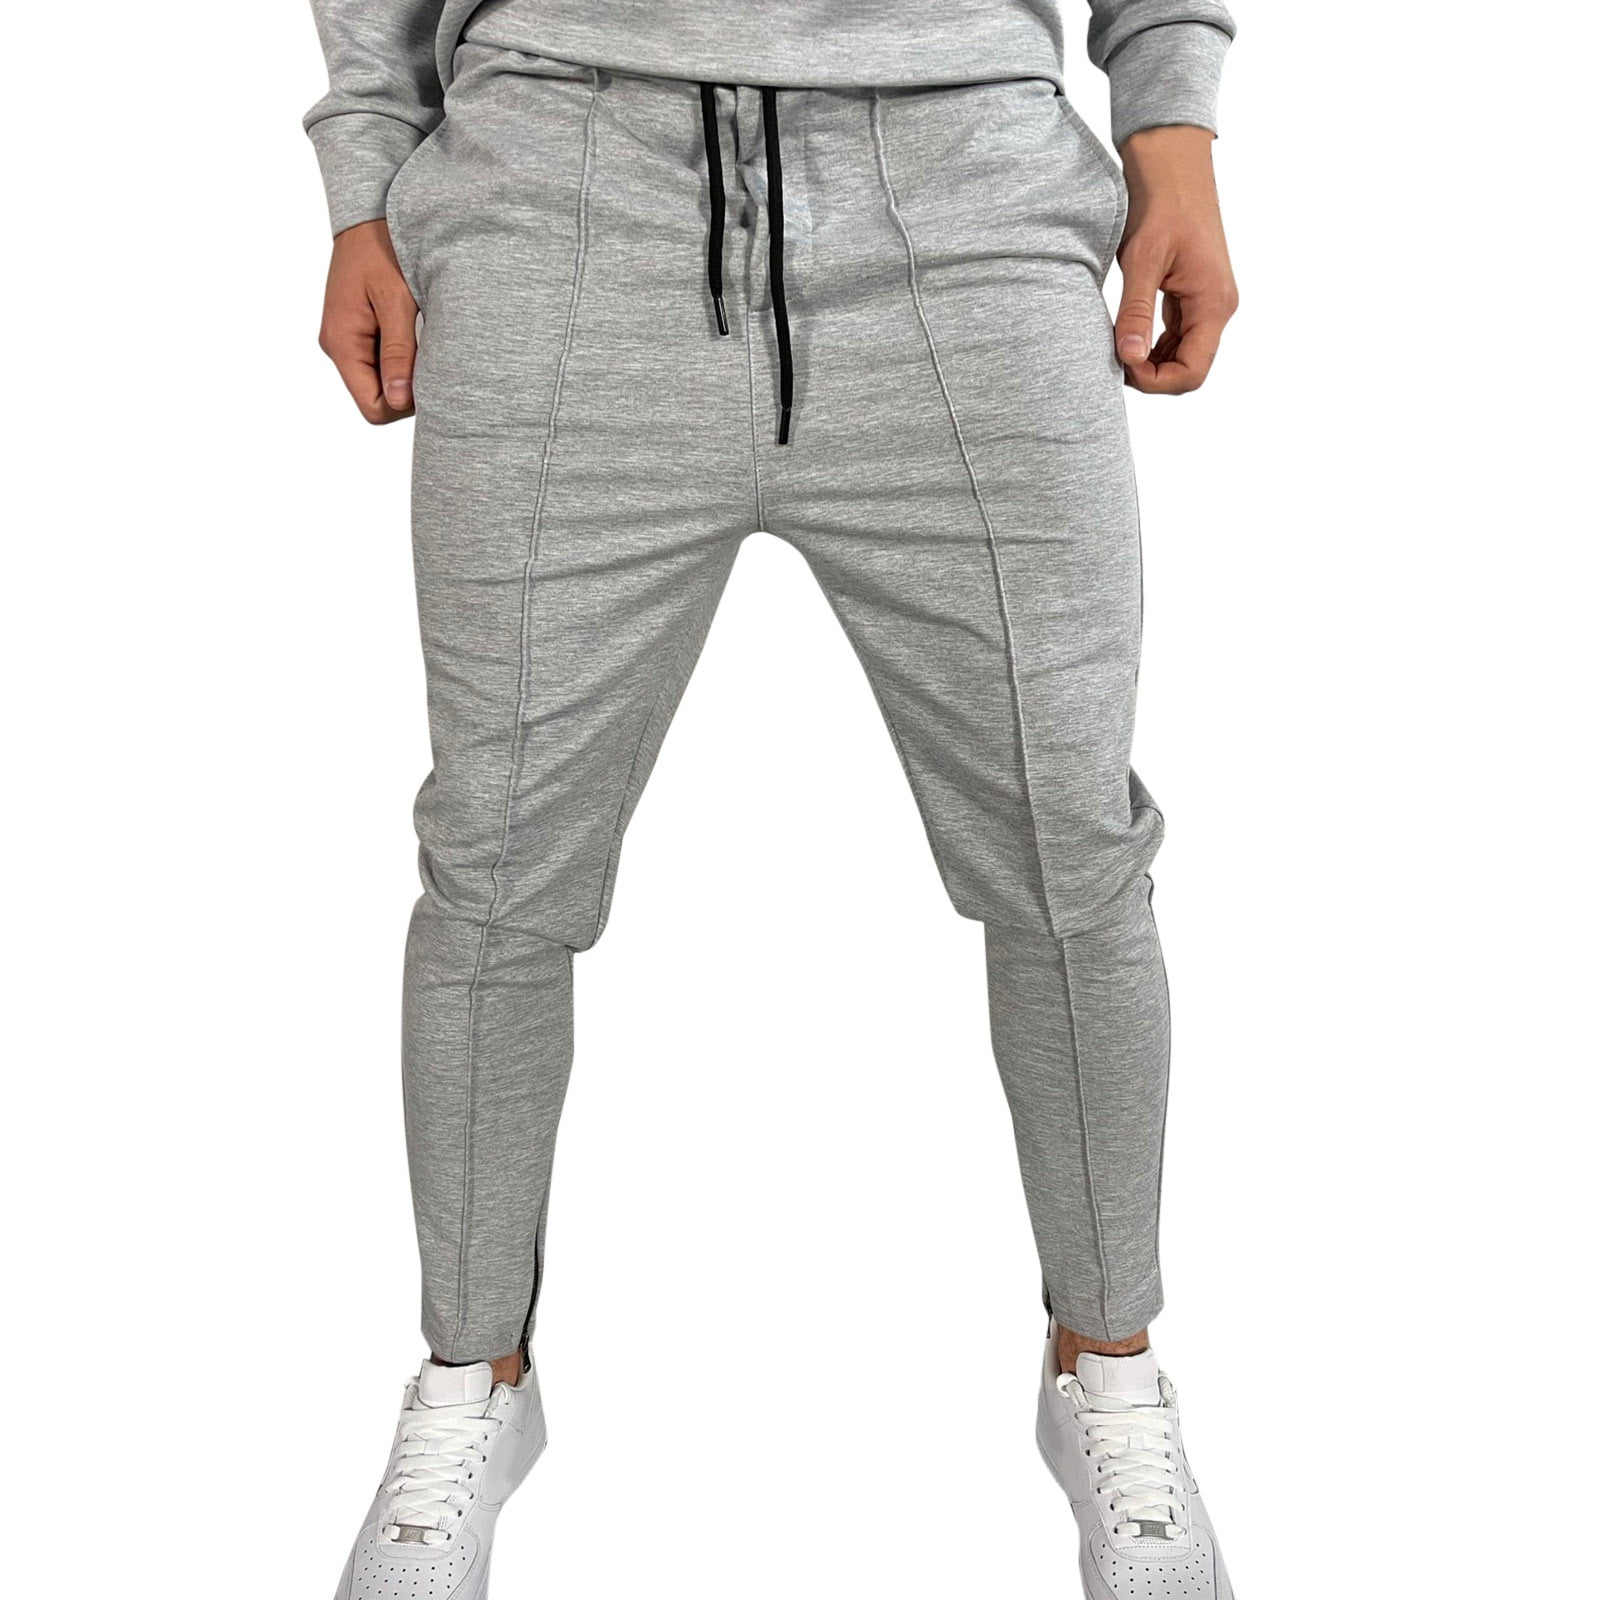 kpoplk Mens Sweatpants Open Bottom,Men's Slim Joggers Workout Pants for Gym Running and Bodybuilding Bottom Sweatpants with Deep Pockets(Grey,L) -